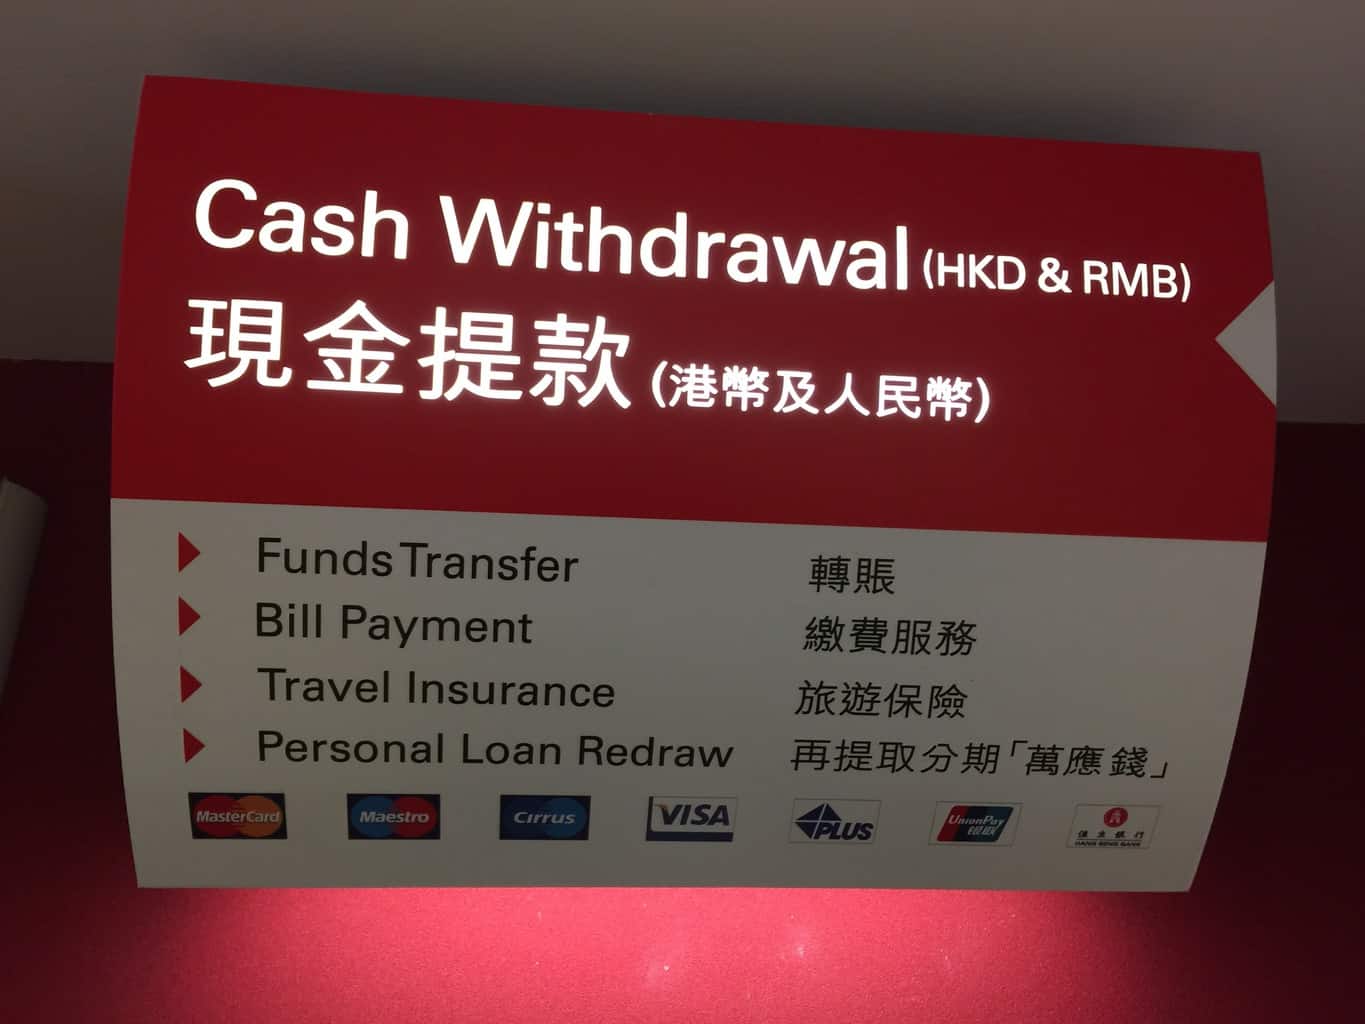 Featured image for “Did you know you can withdraw RMB from Hong Kong ATMs?”